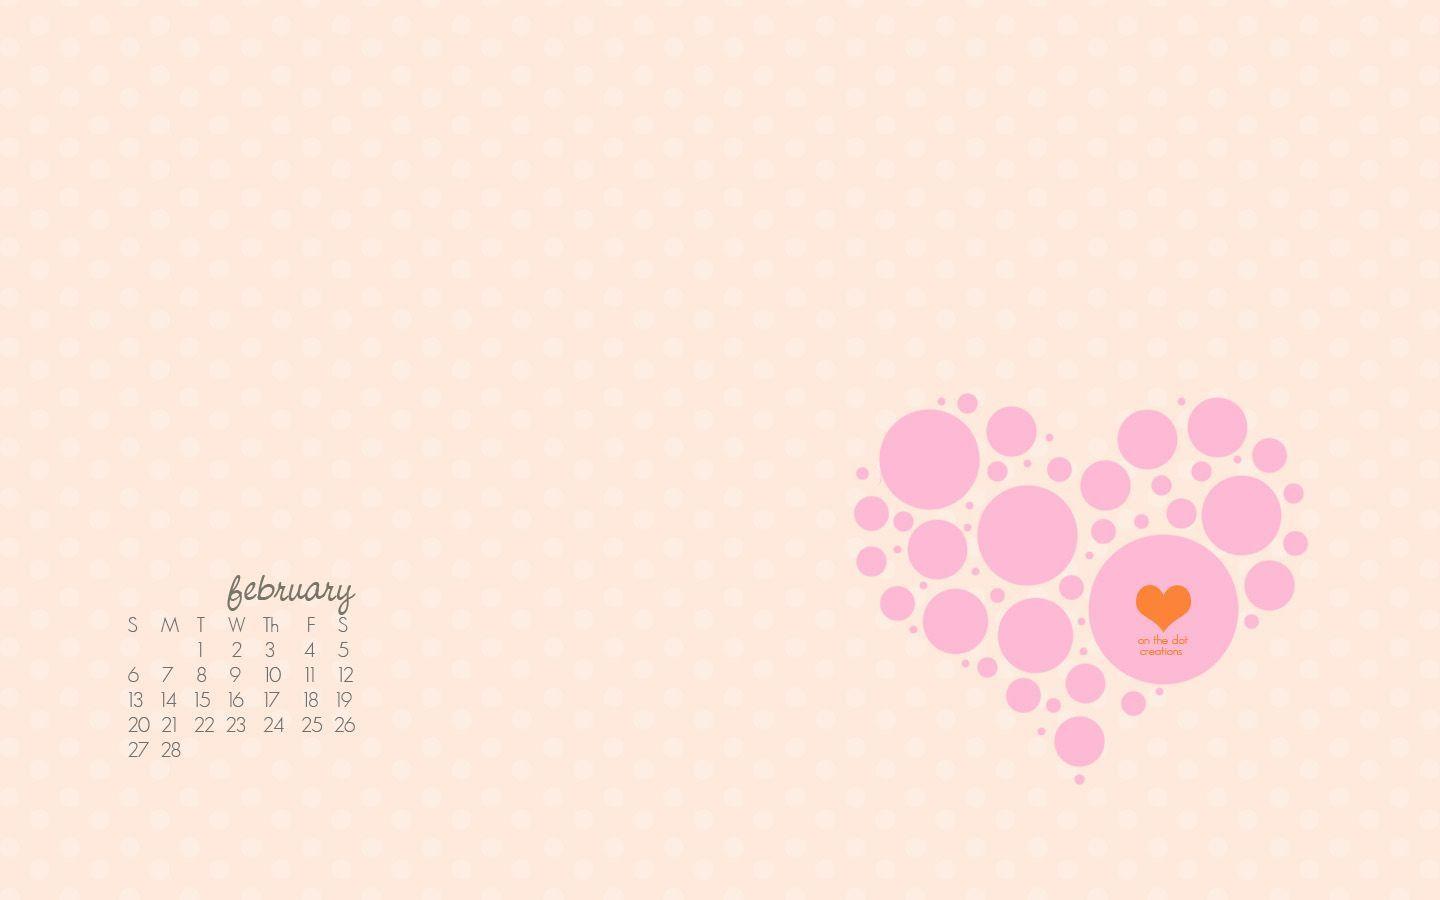 A February 2011 Desktop Wallpaper for You the Dot Creations